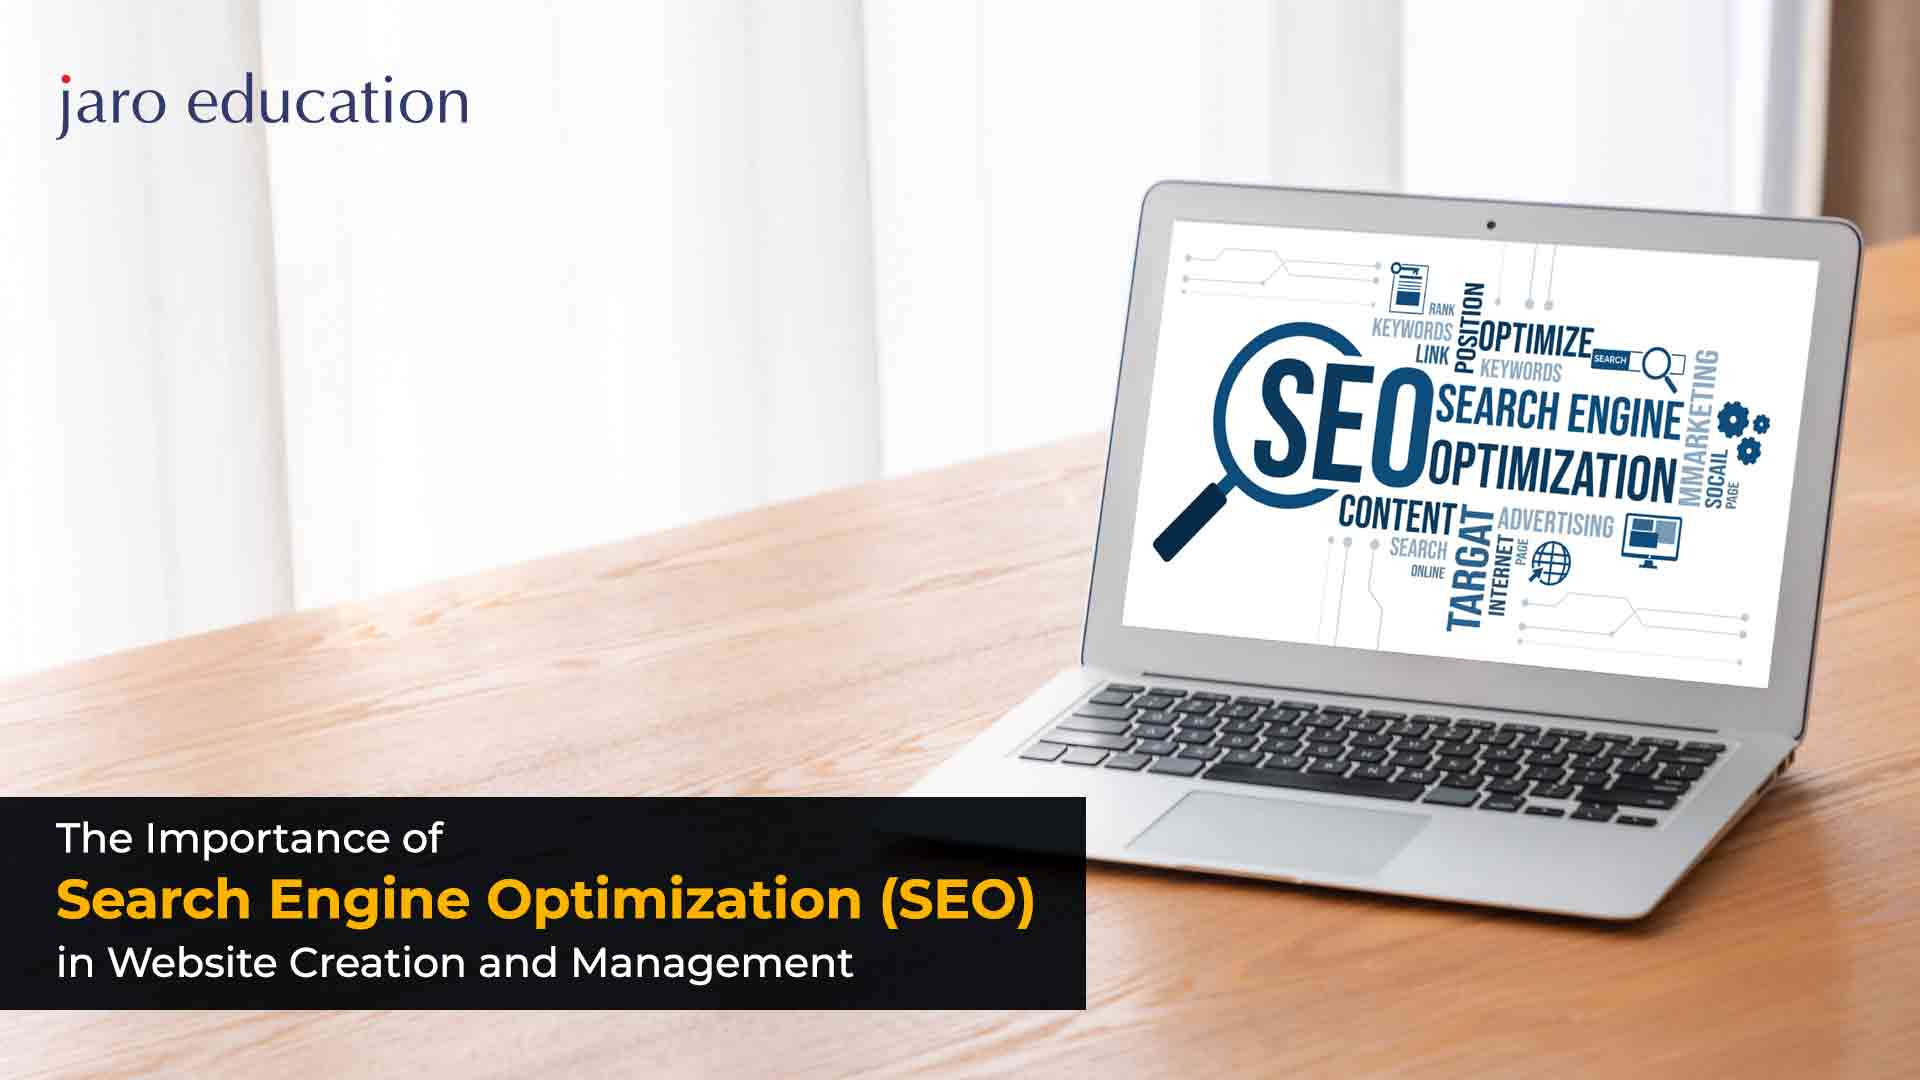 The-Importance-of-search-engine-optimization-in-website-creation-and-management - jaro